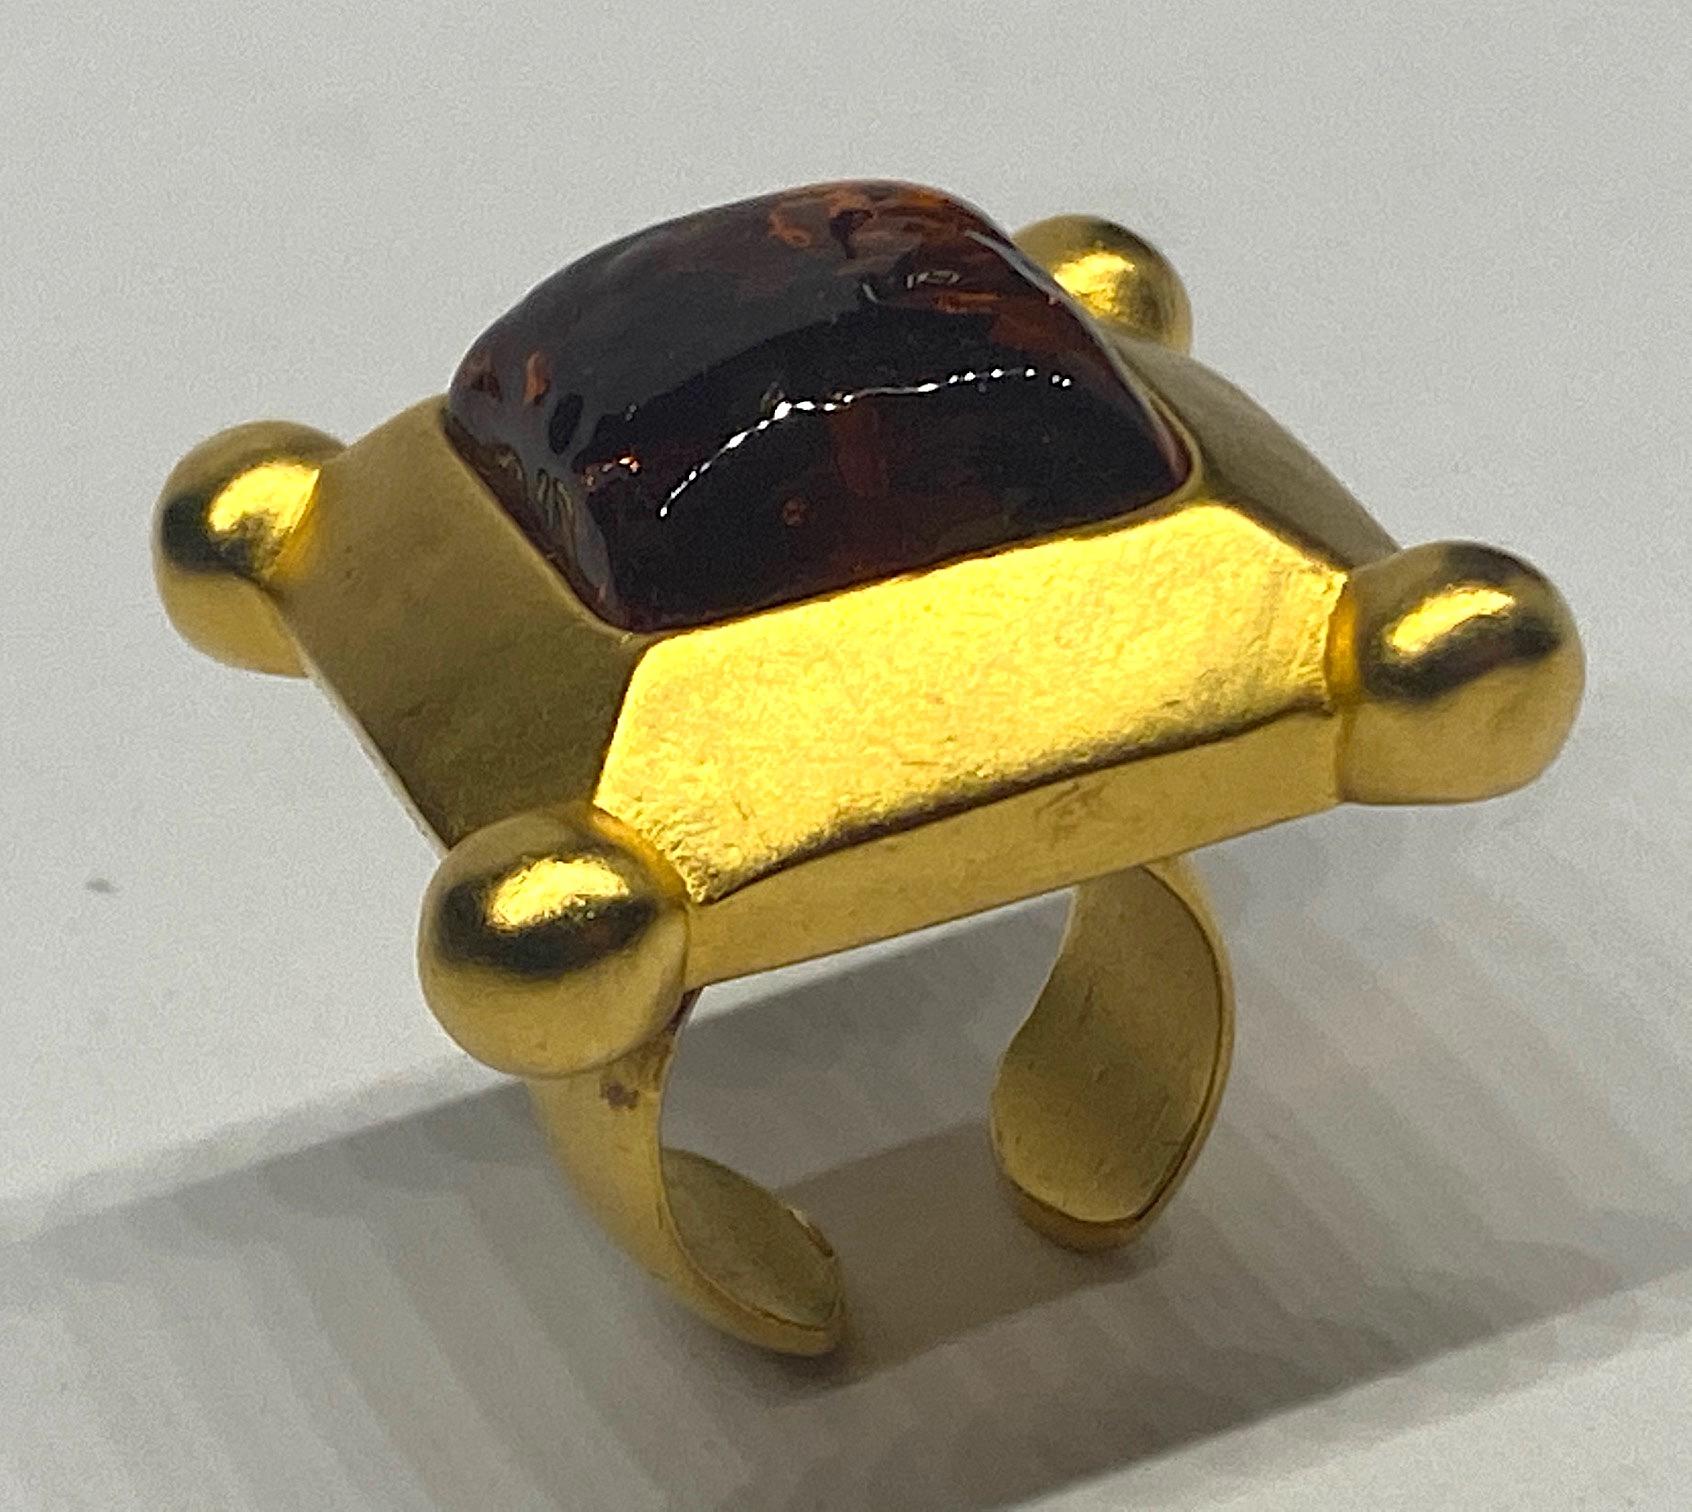 Karl Lagerfeld 1980s Gold & Glass Stone Ring 9